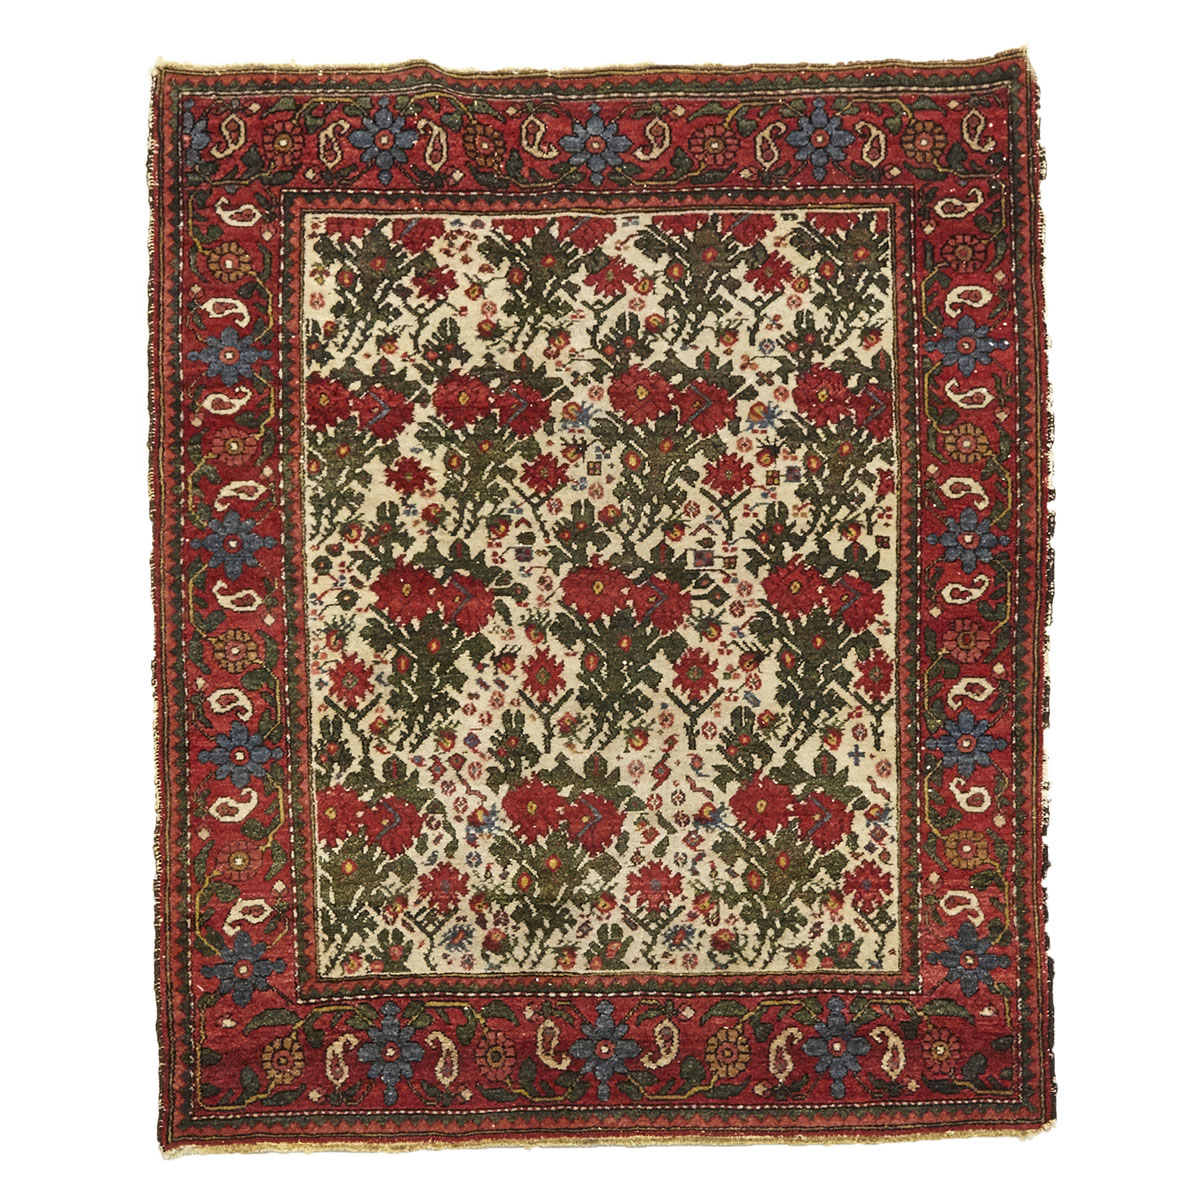 Malayer Rug, early 20th century